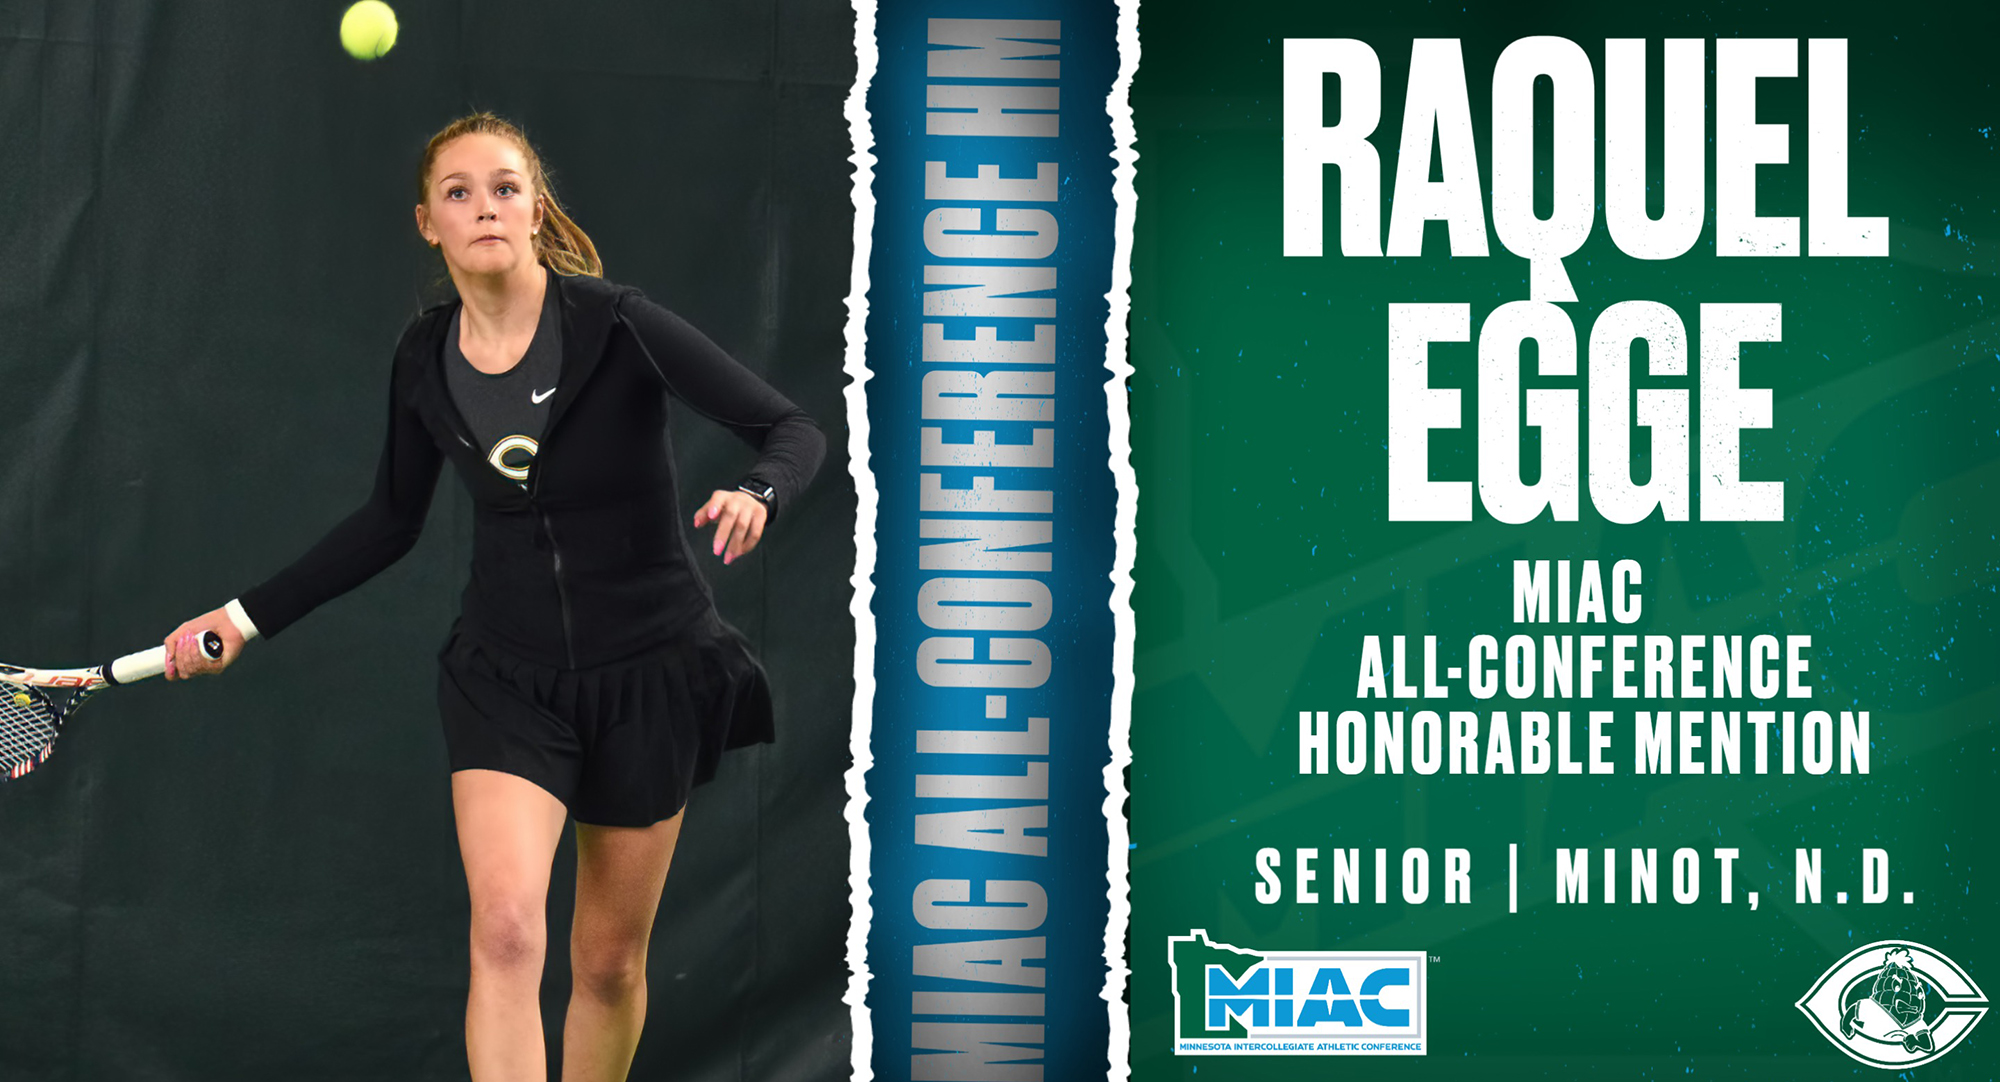 Raquel Egge earned MIAC postseason honors for the second time as she was named to the All-Conference Honorable Mention Team in singles play.